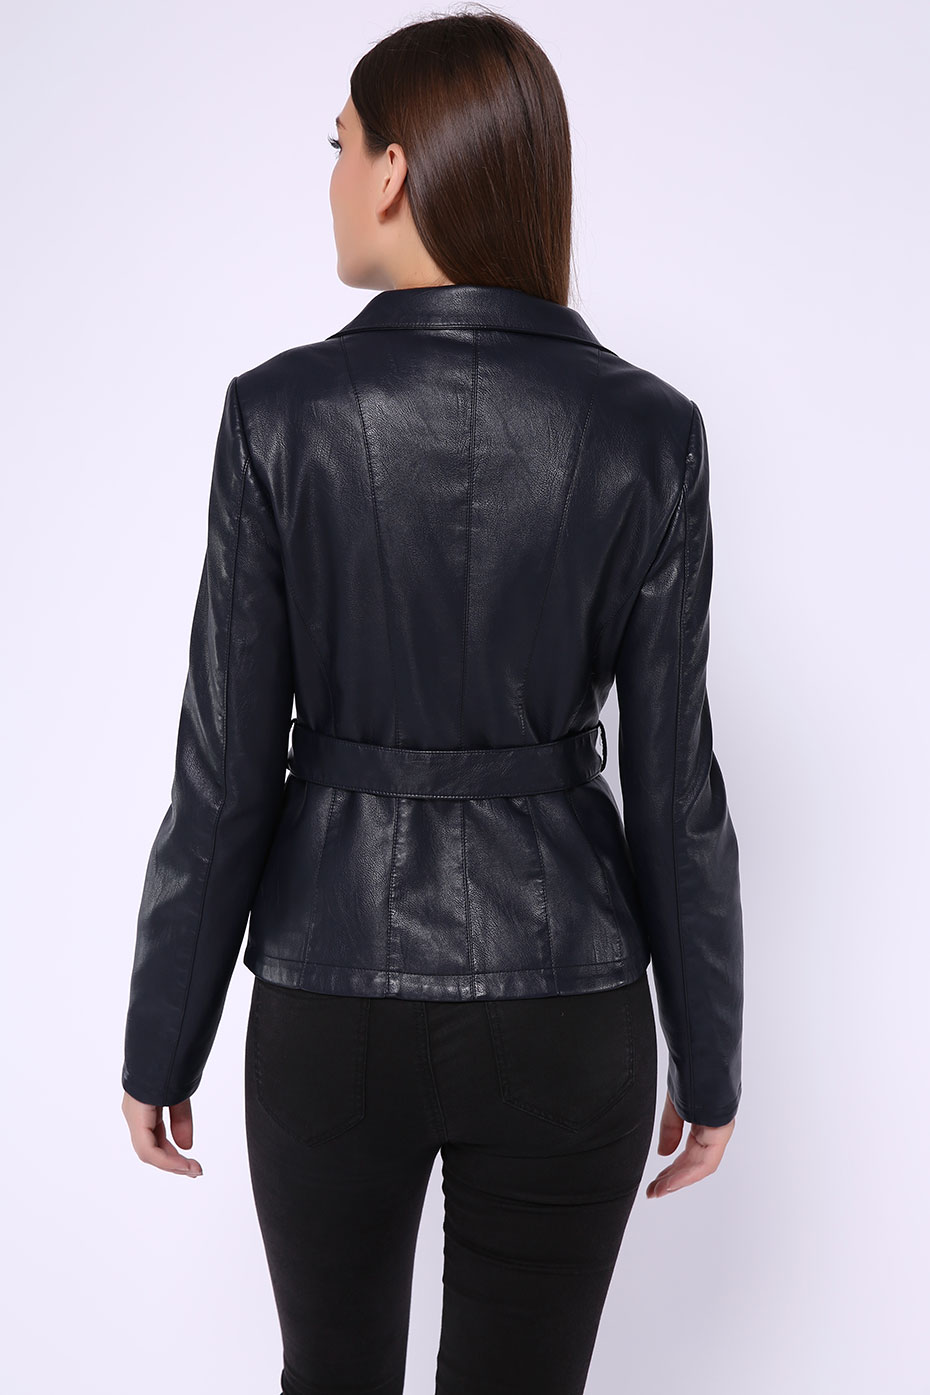 AORRYVLA-Hot-Jackets-For-Women-Autumn-2019-Brand-Leather-Jacket-Gothic-Large-Turn-Down-Collar-Sashes-32913027294